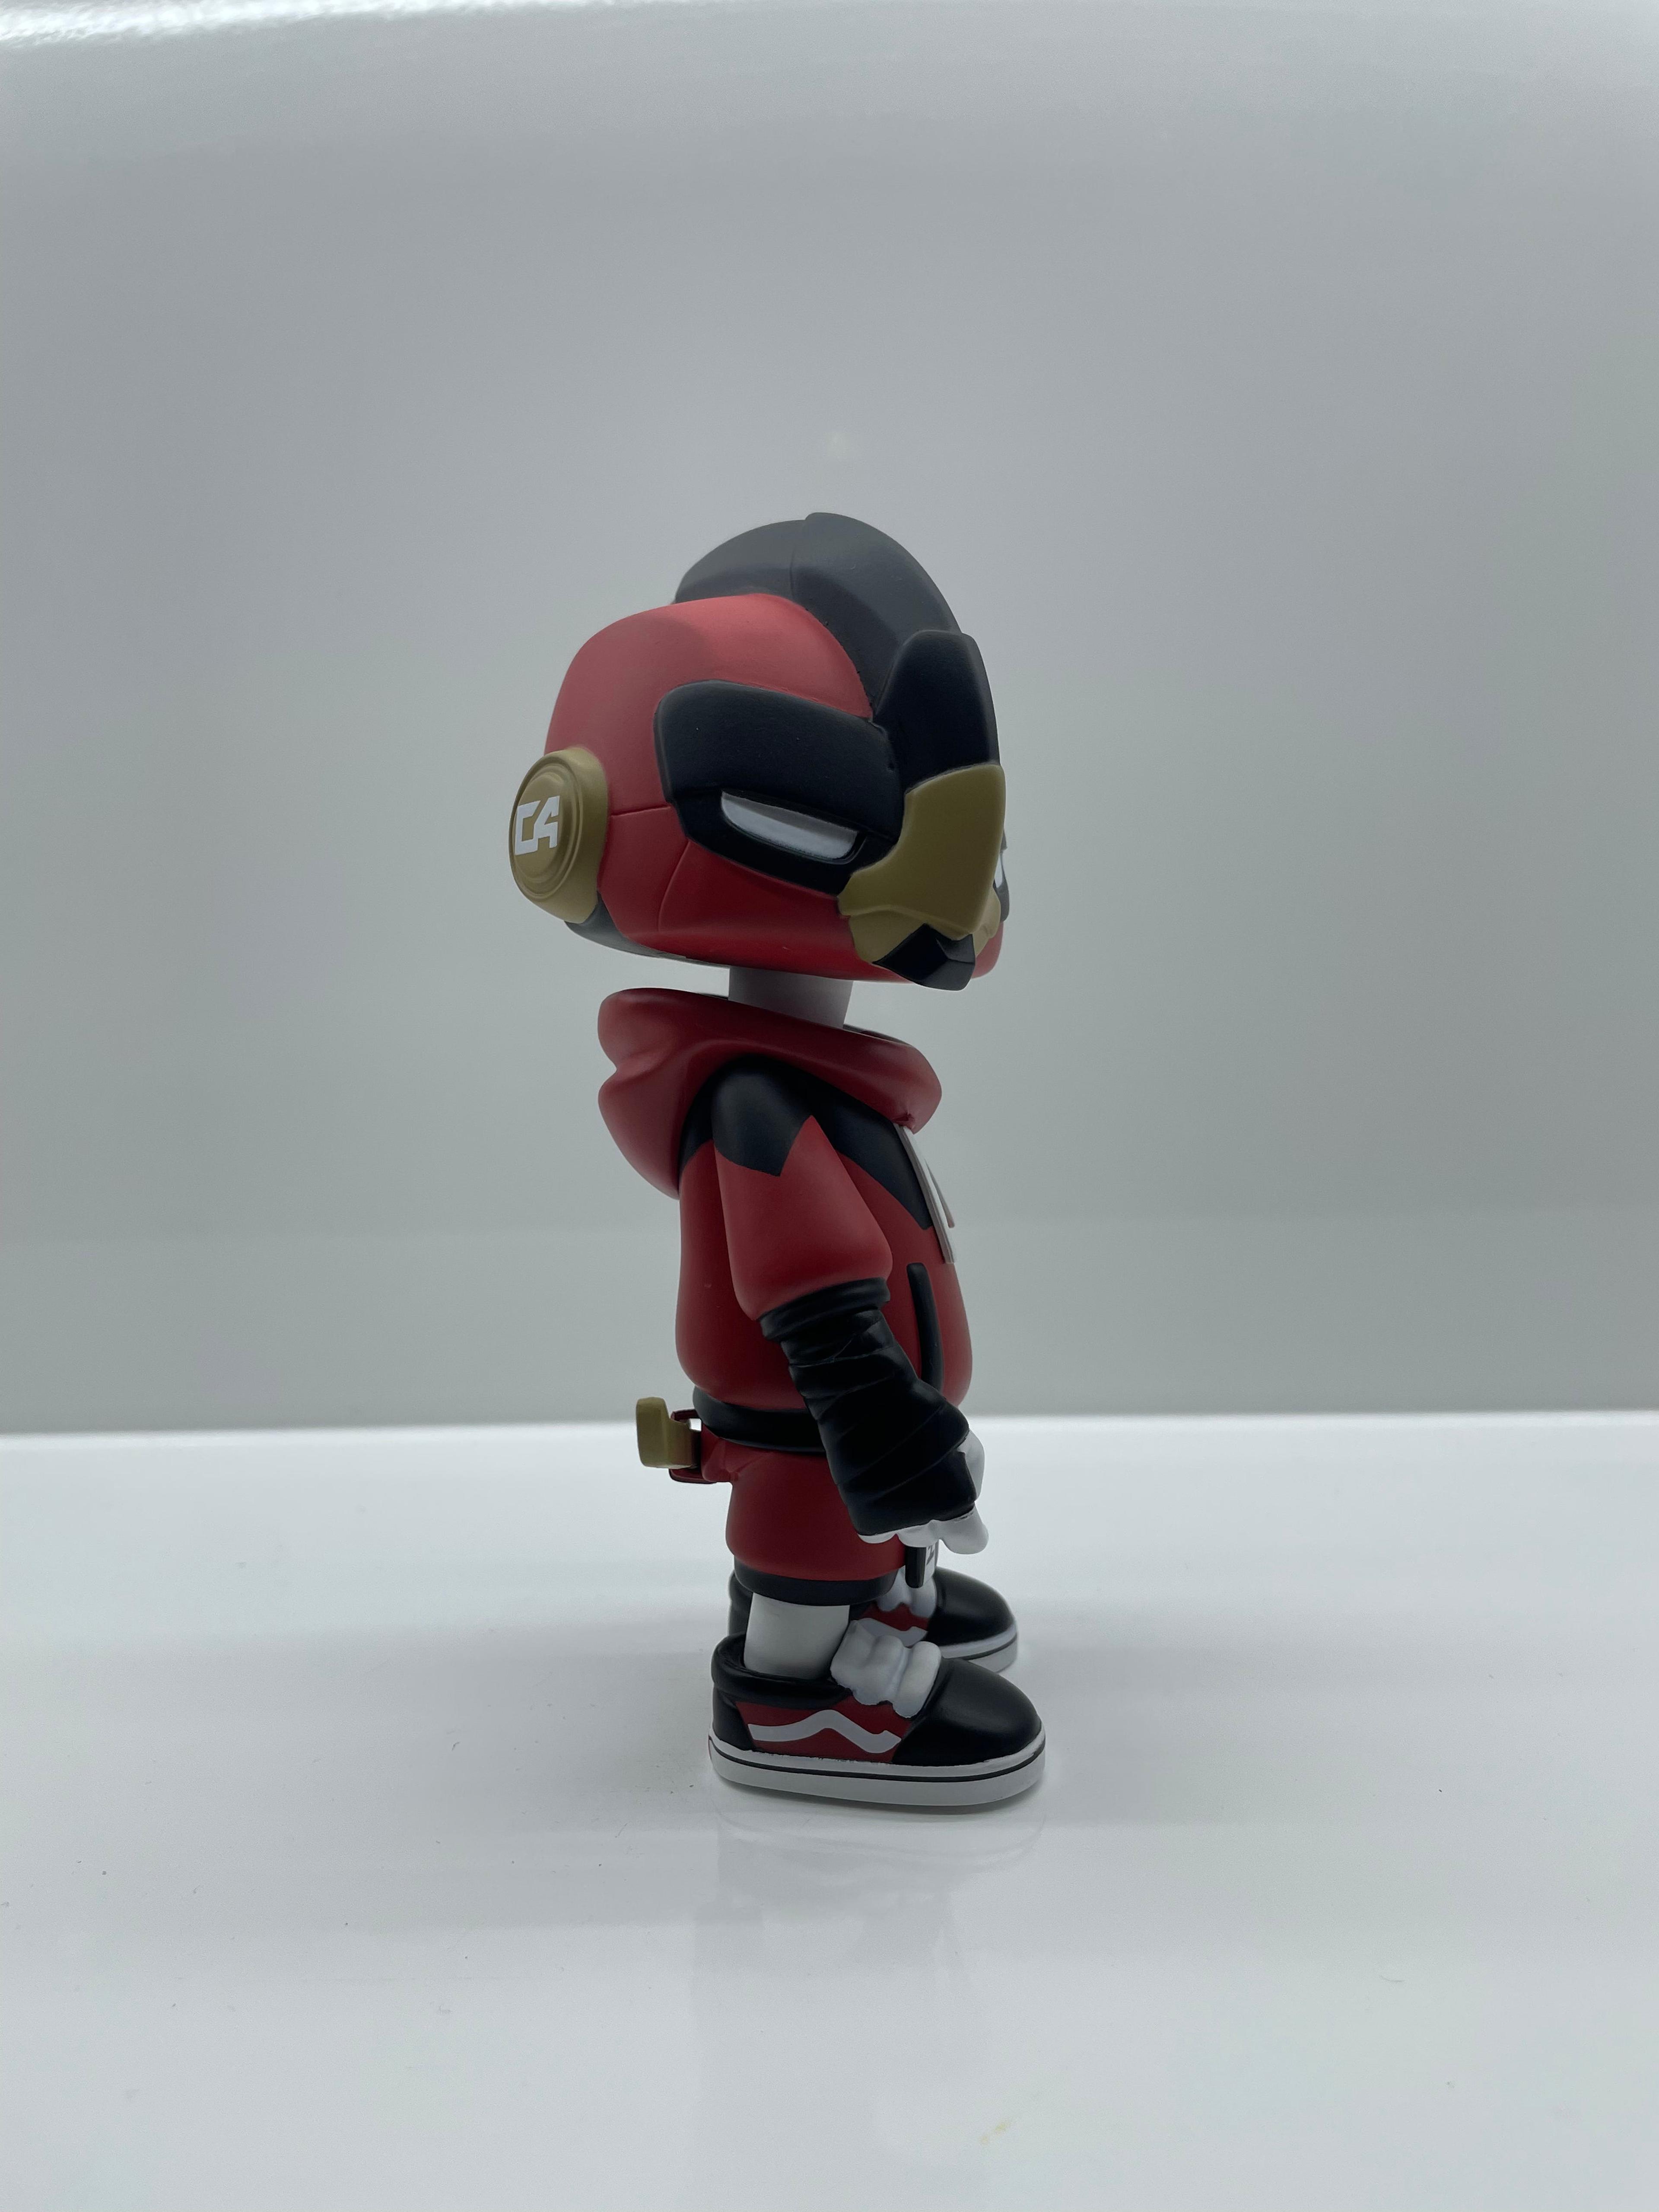 Alternate View 8 of C4: Red Talon by ChknHead Creon x Martian Toys